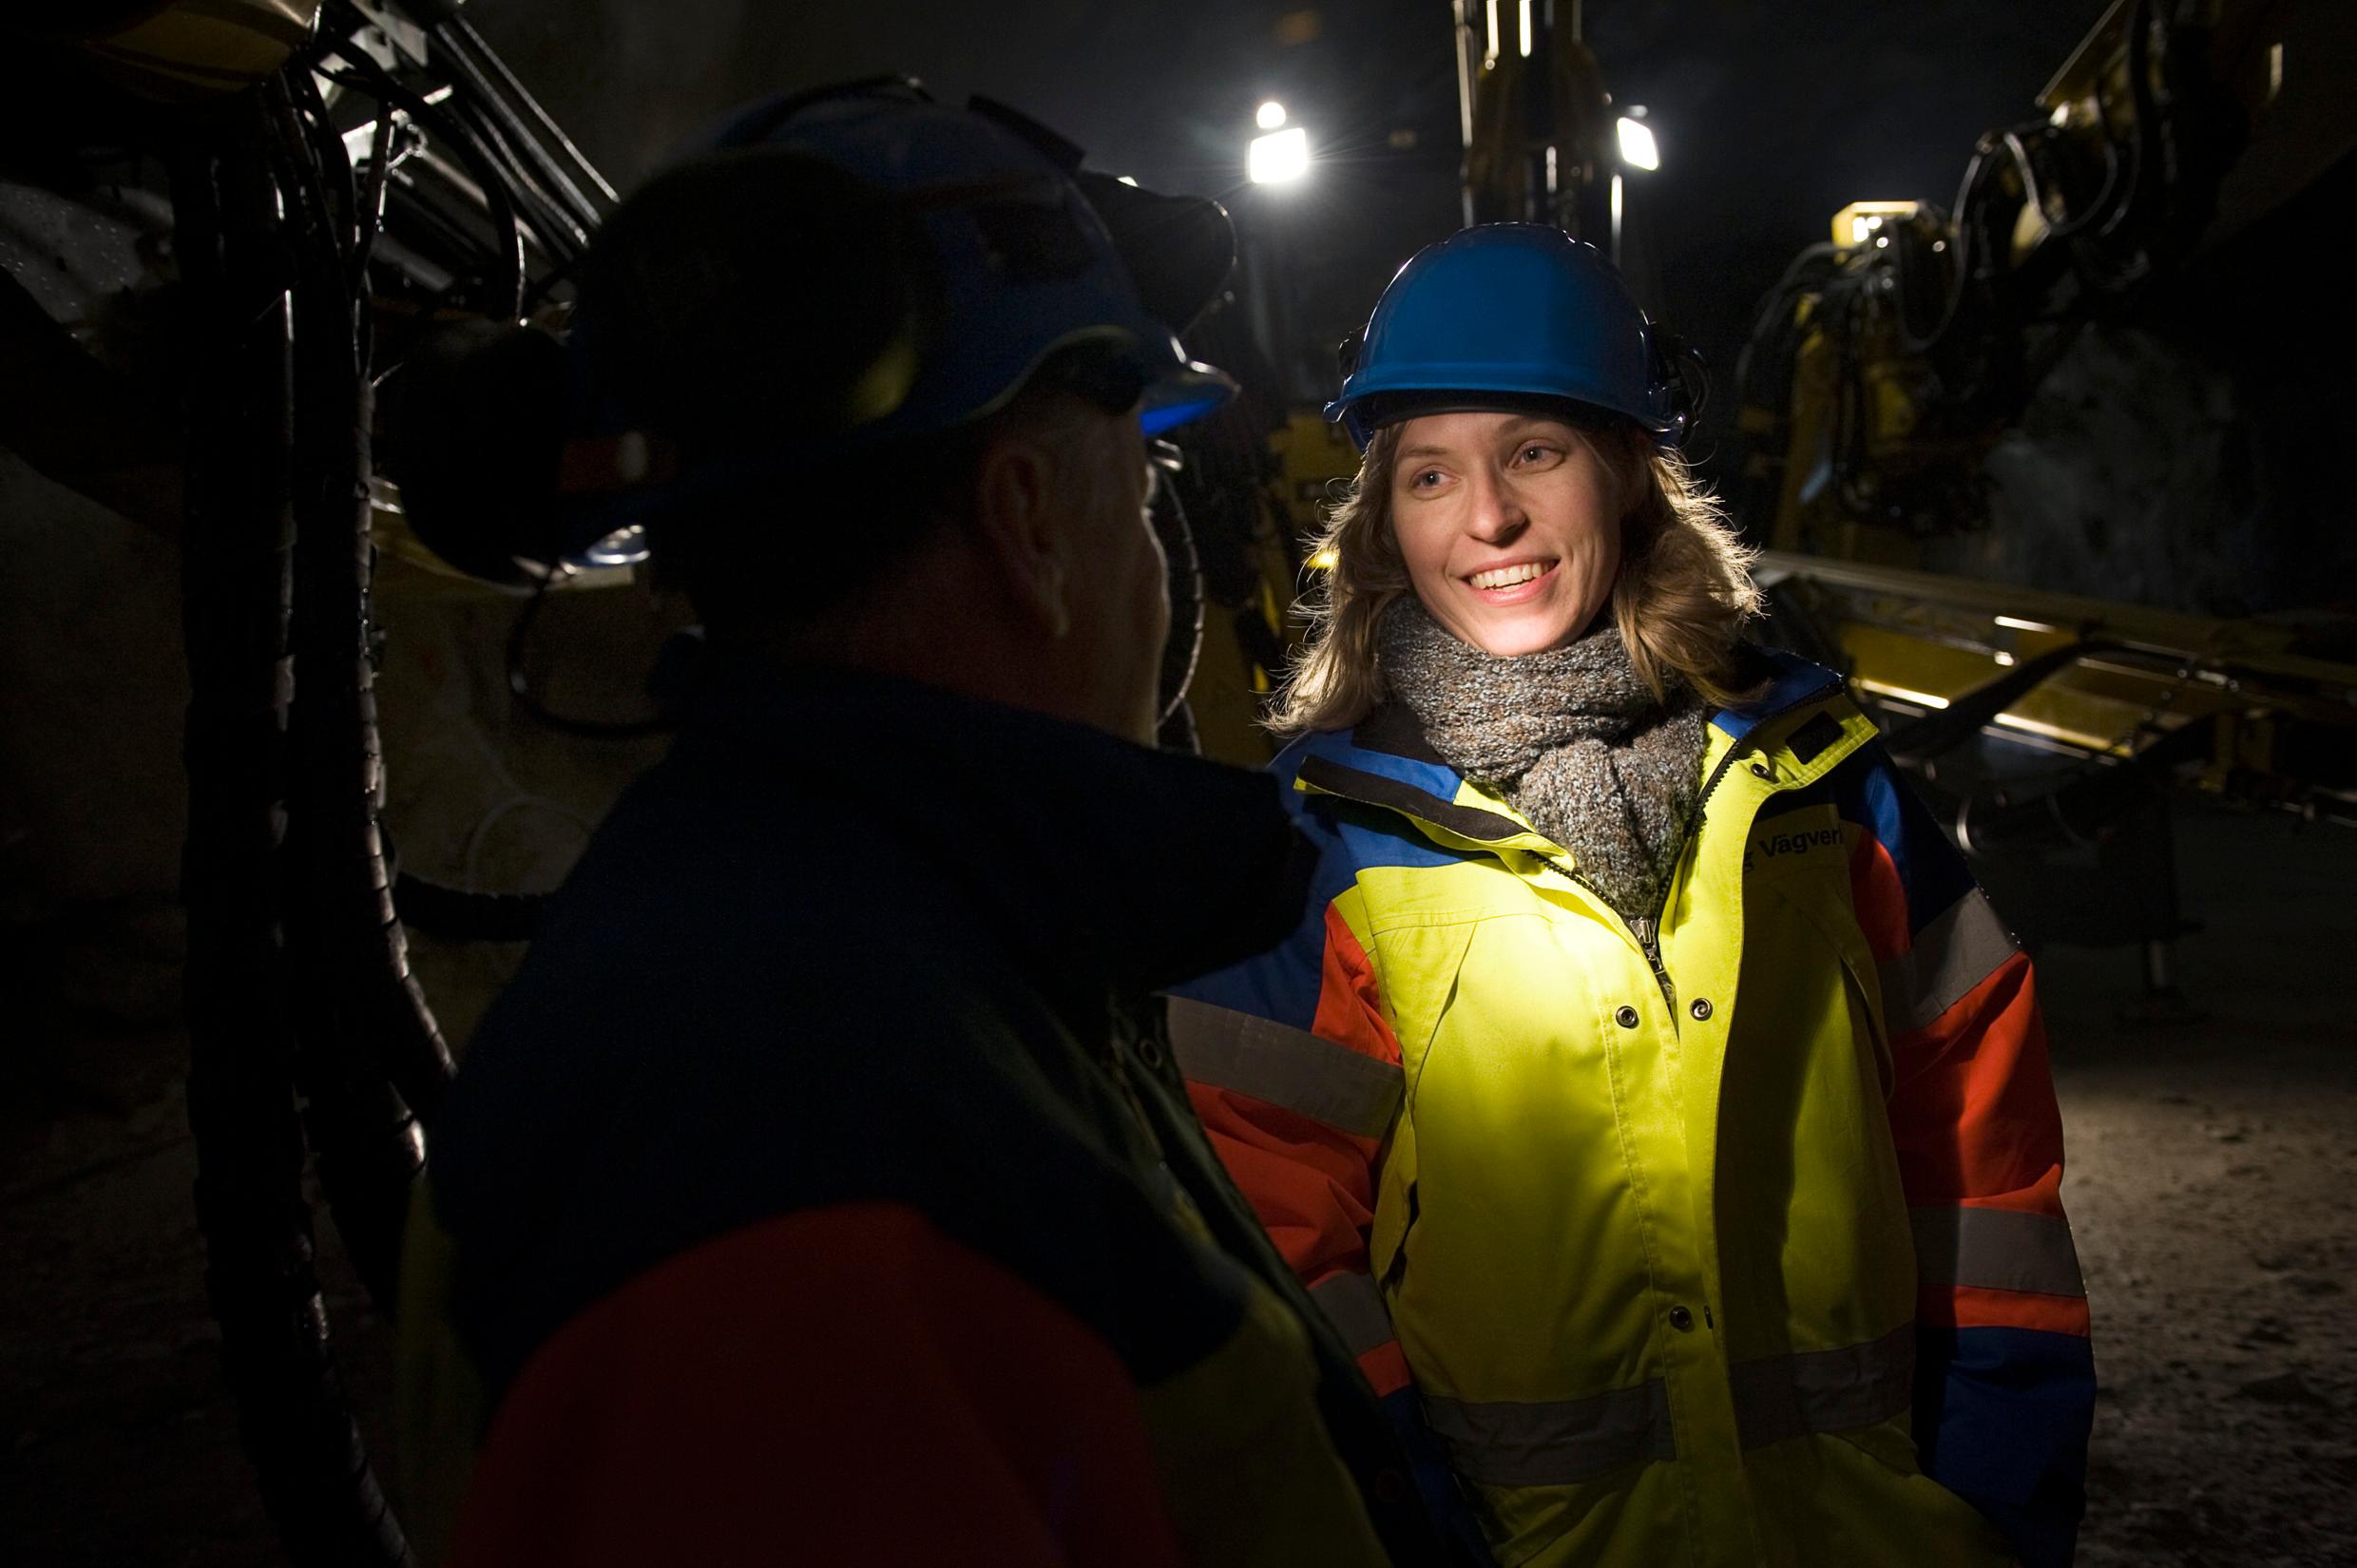 A woman in a yellow high-visibility jacket and a blue helmet stading in a dark location, her face lit up.